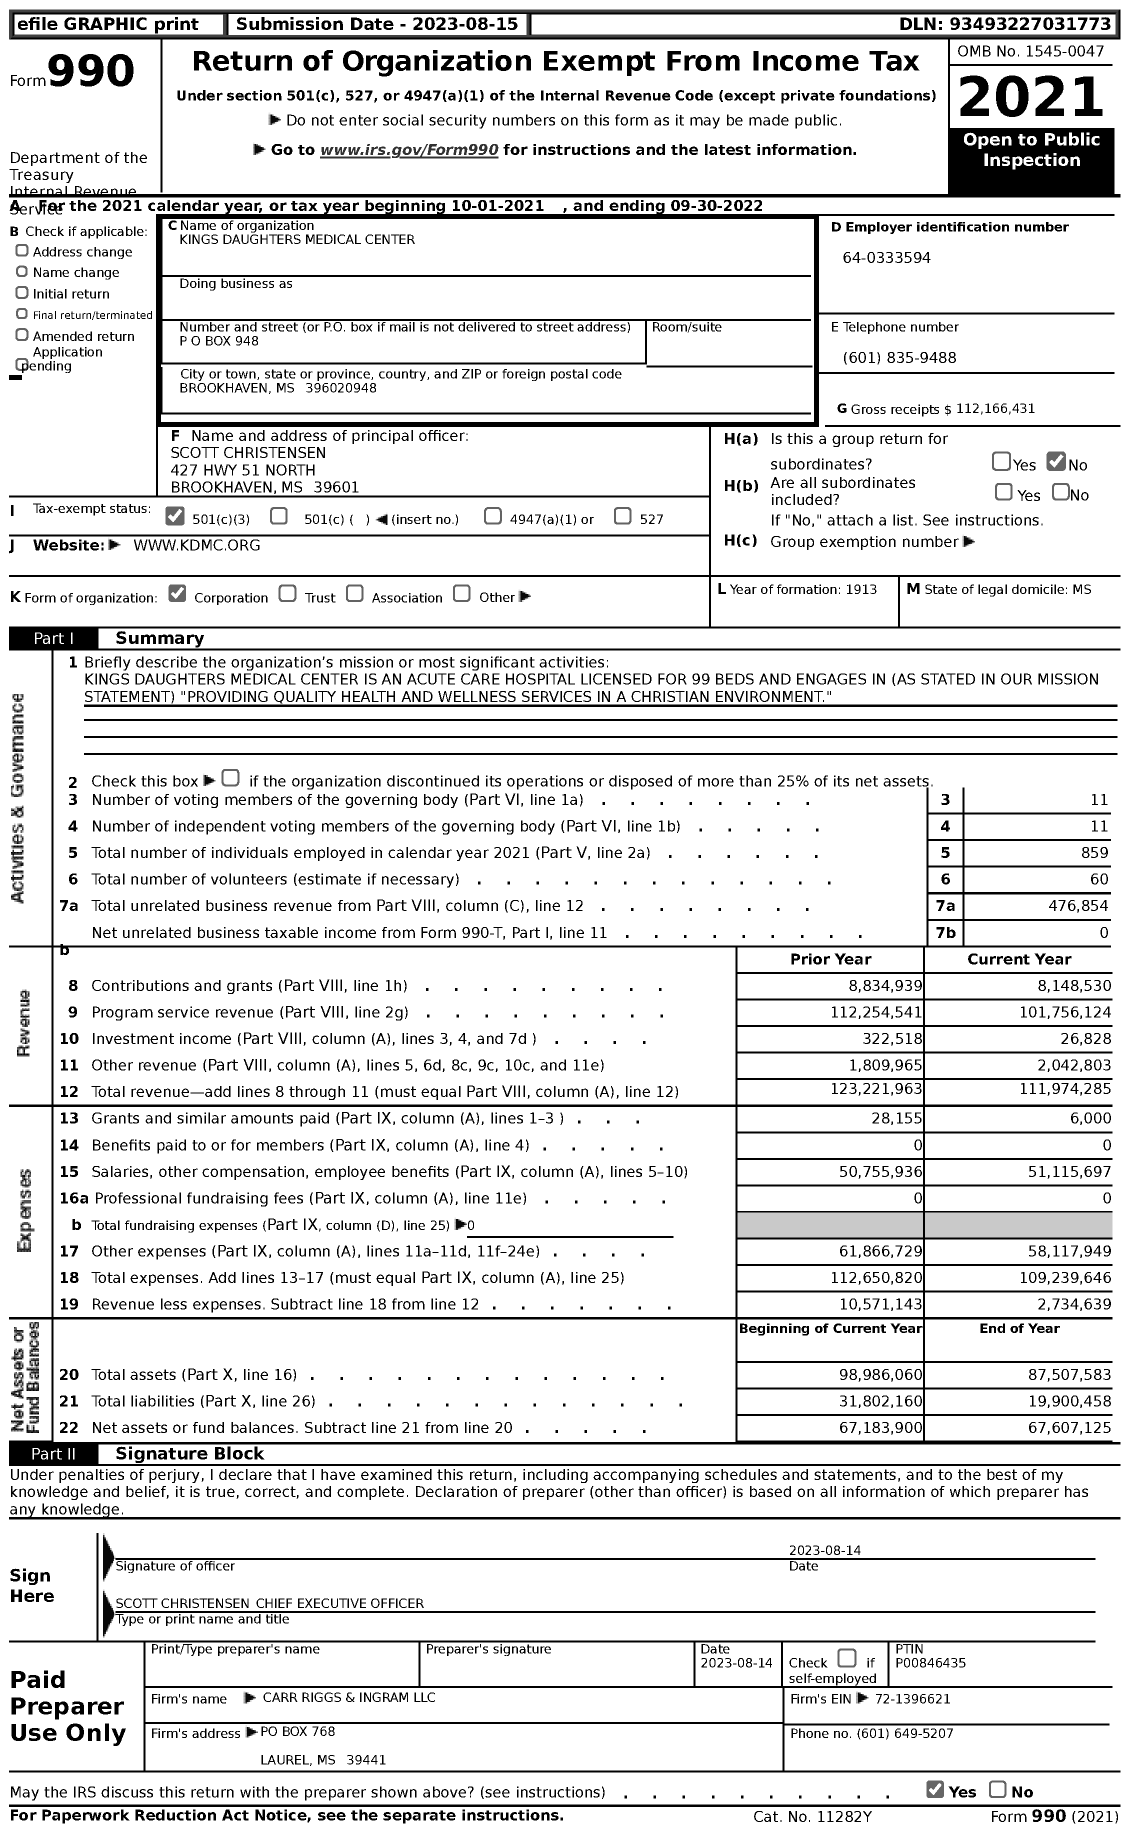 Image of first page of 2021 Form 990 for King's Daughters Medical Center (KDMC)